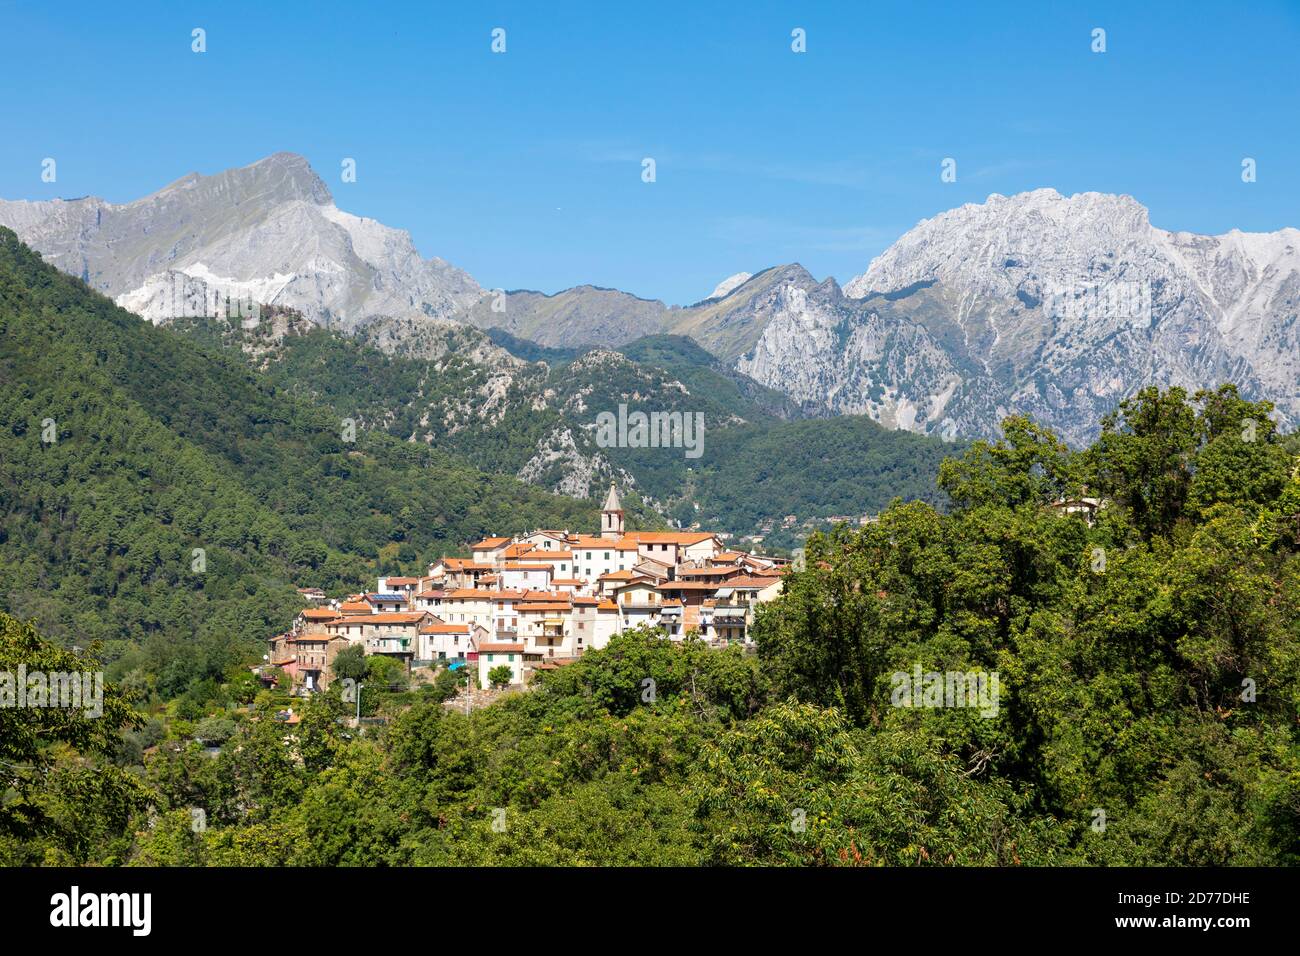 The village of Pariana in the Apuan Alps, Italy Stock Photo